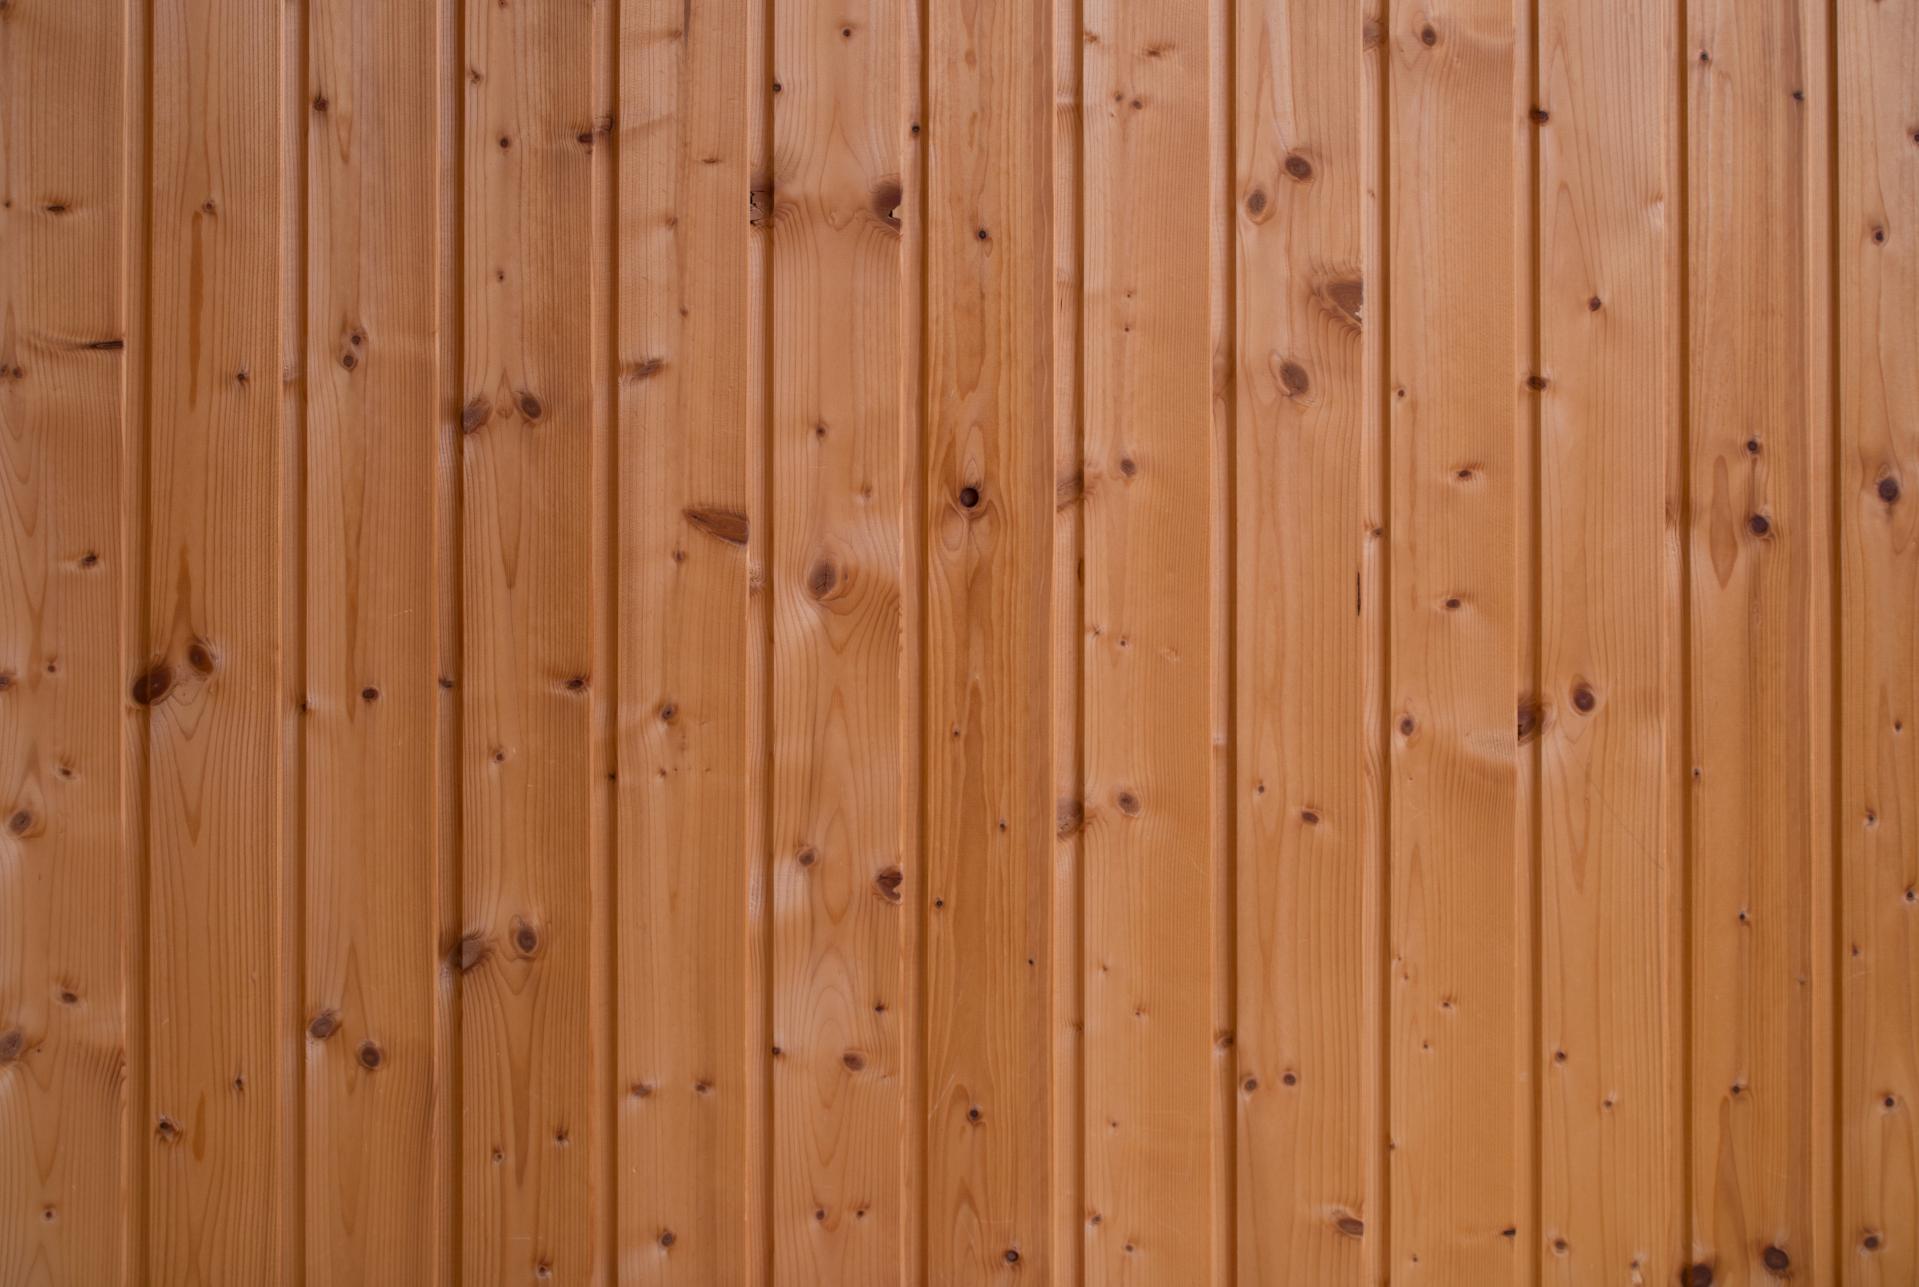 Wooden background - pattern of spruce